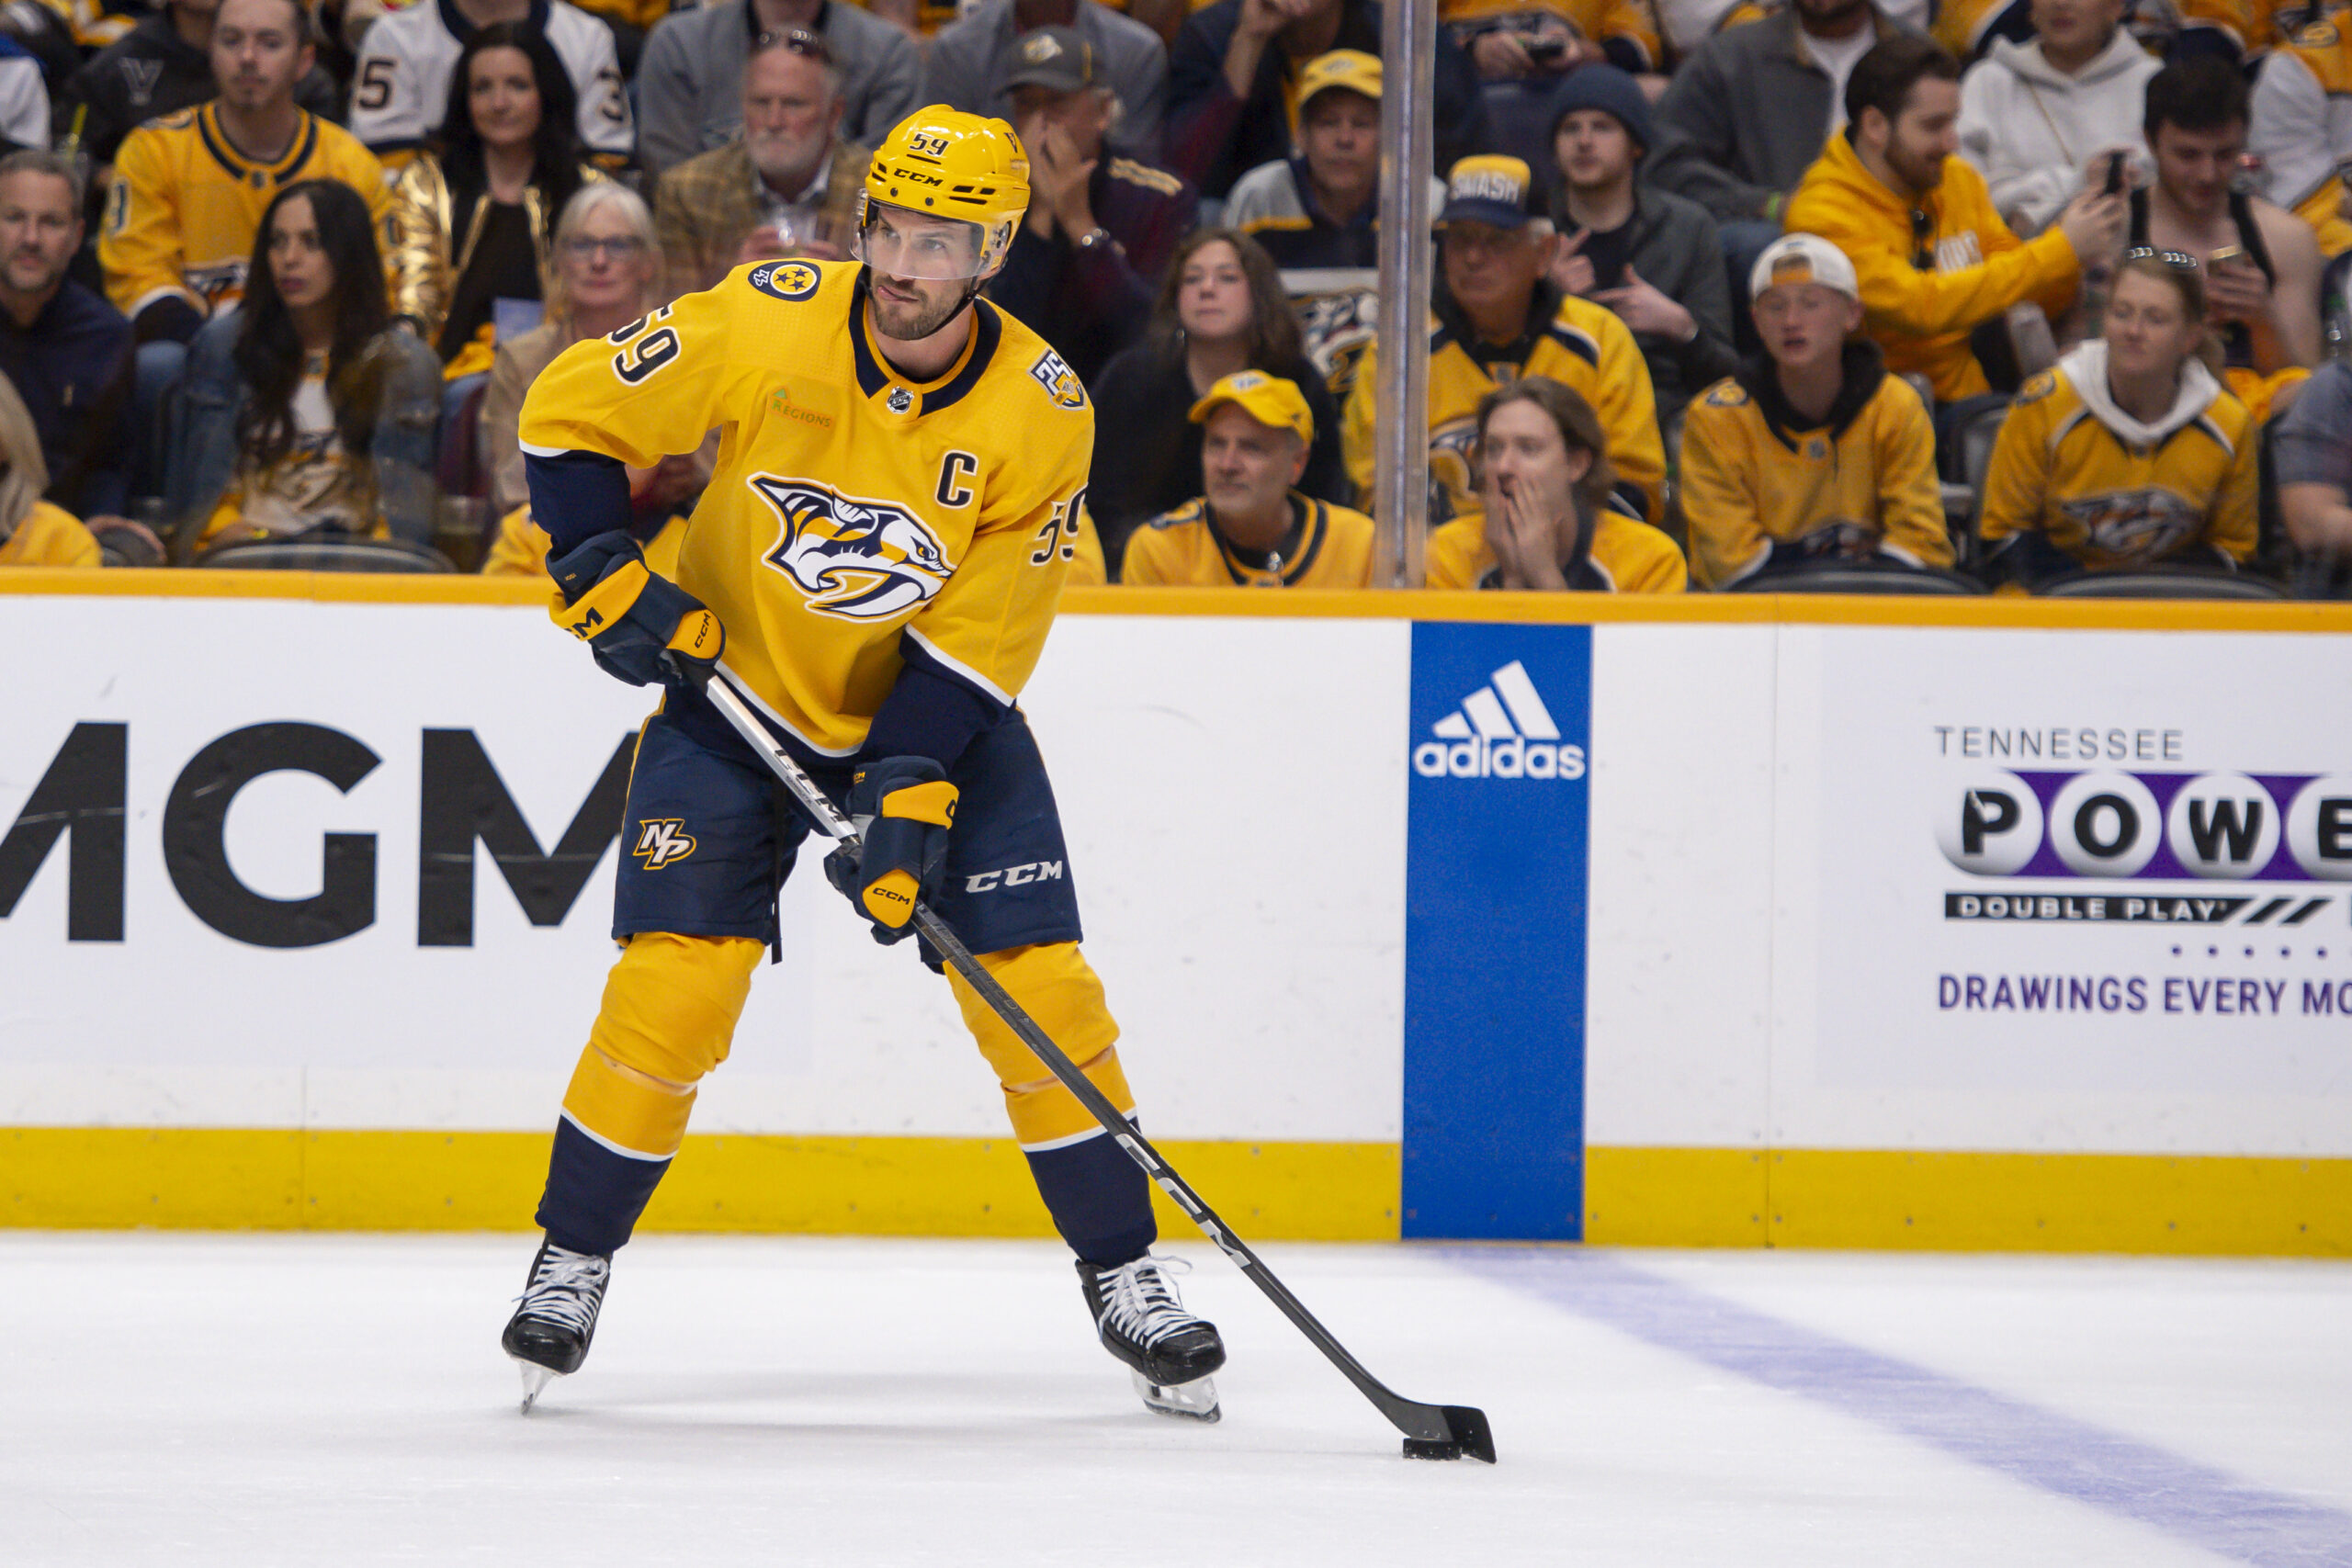 Game Four Between Canucks and Preds Sees Josi Lose Piece of Ear